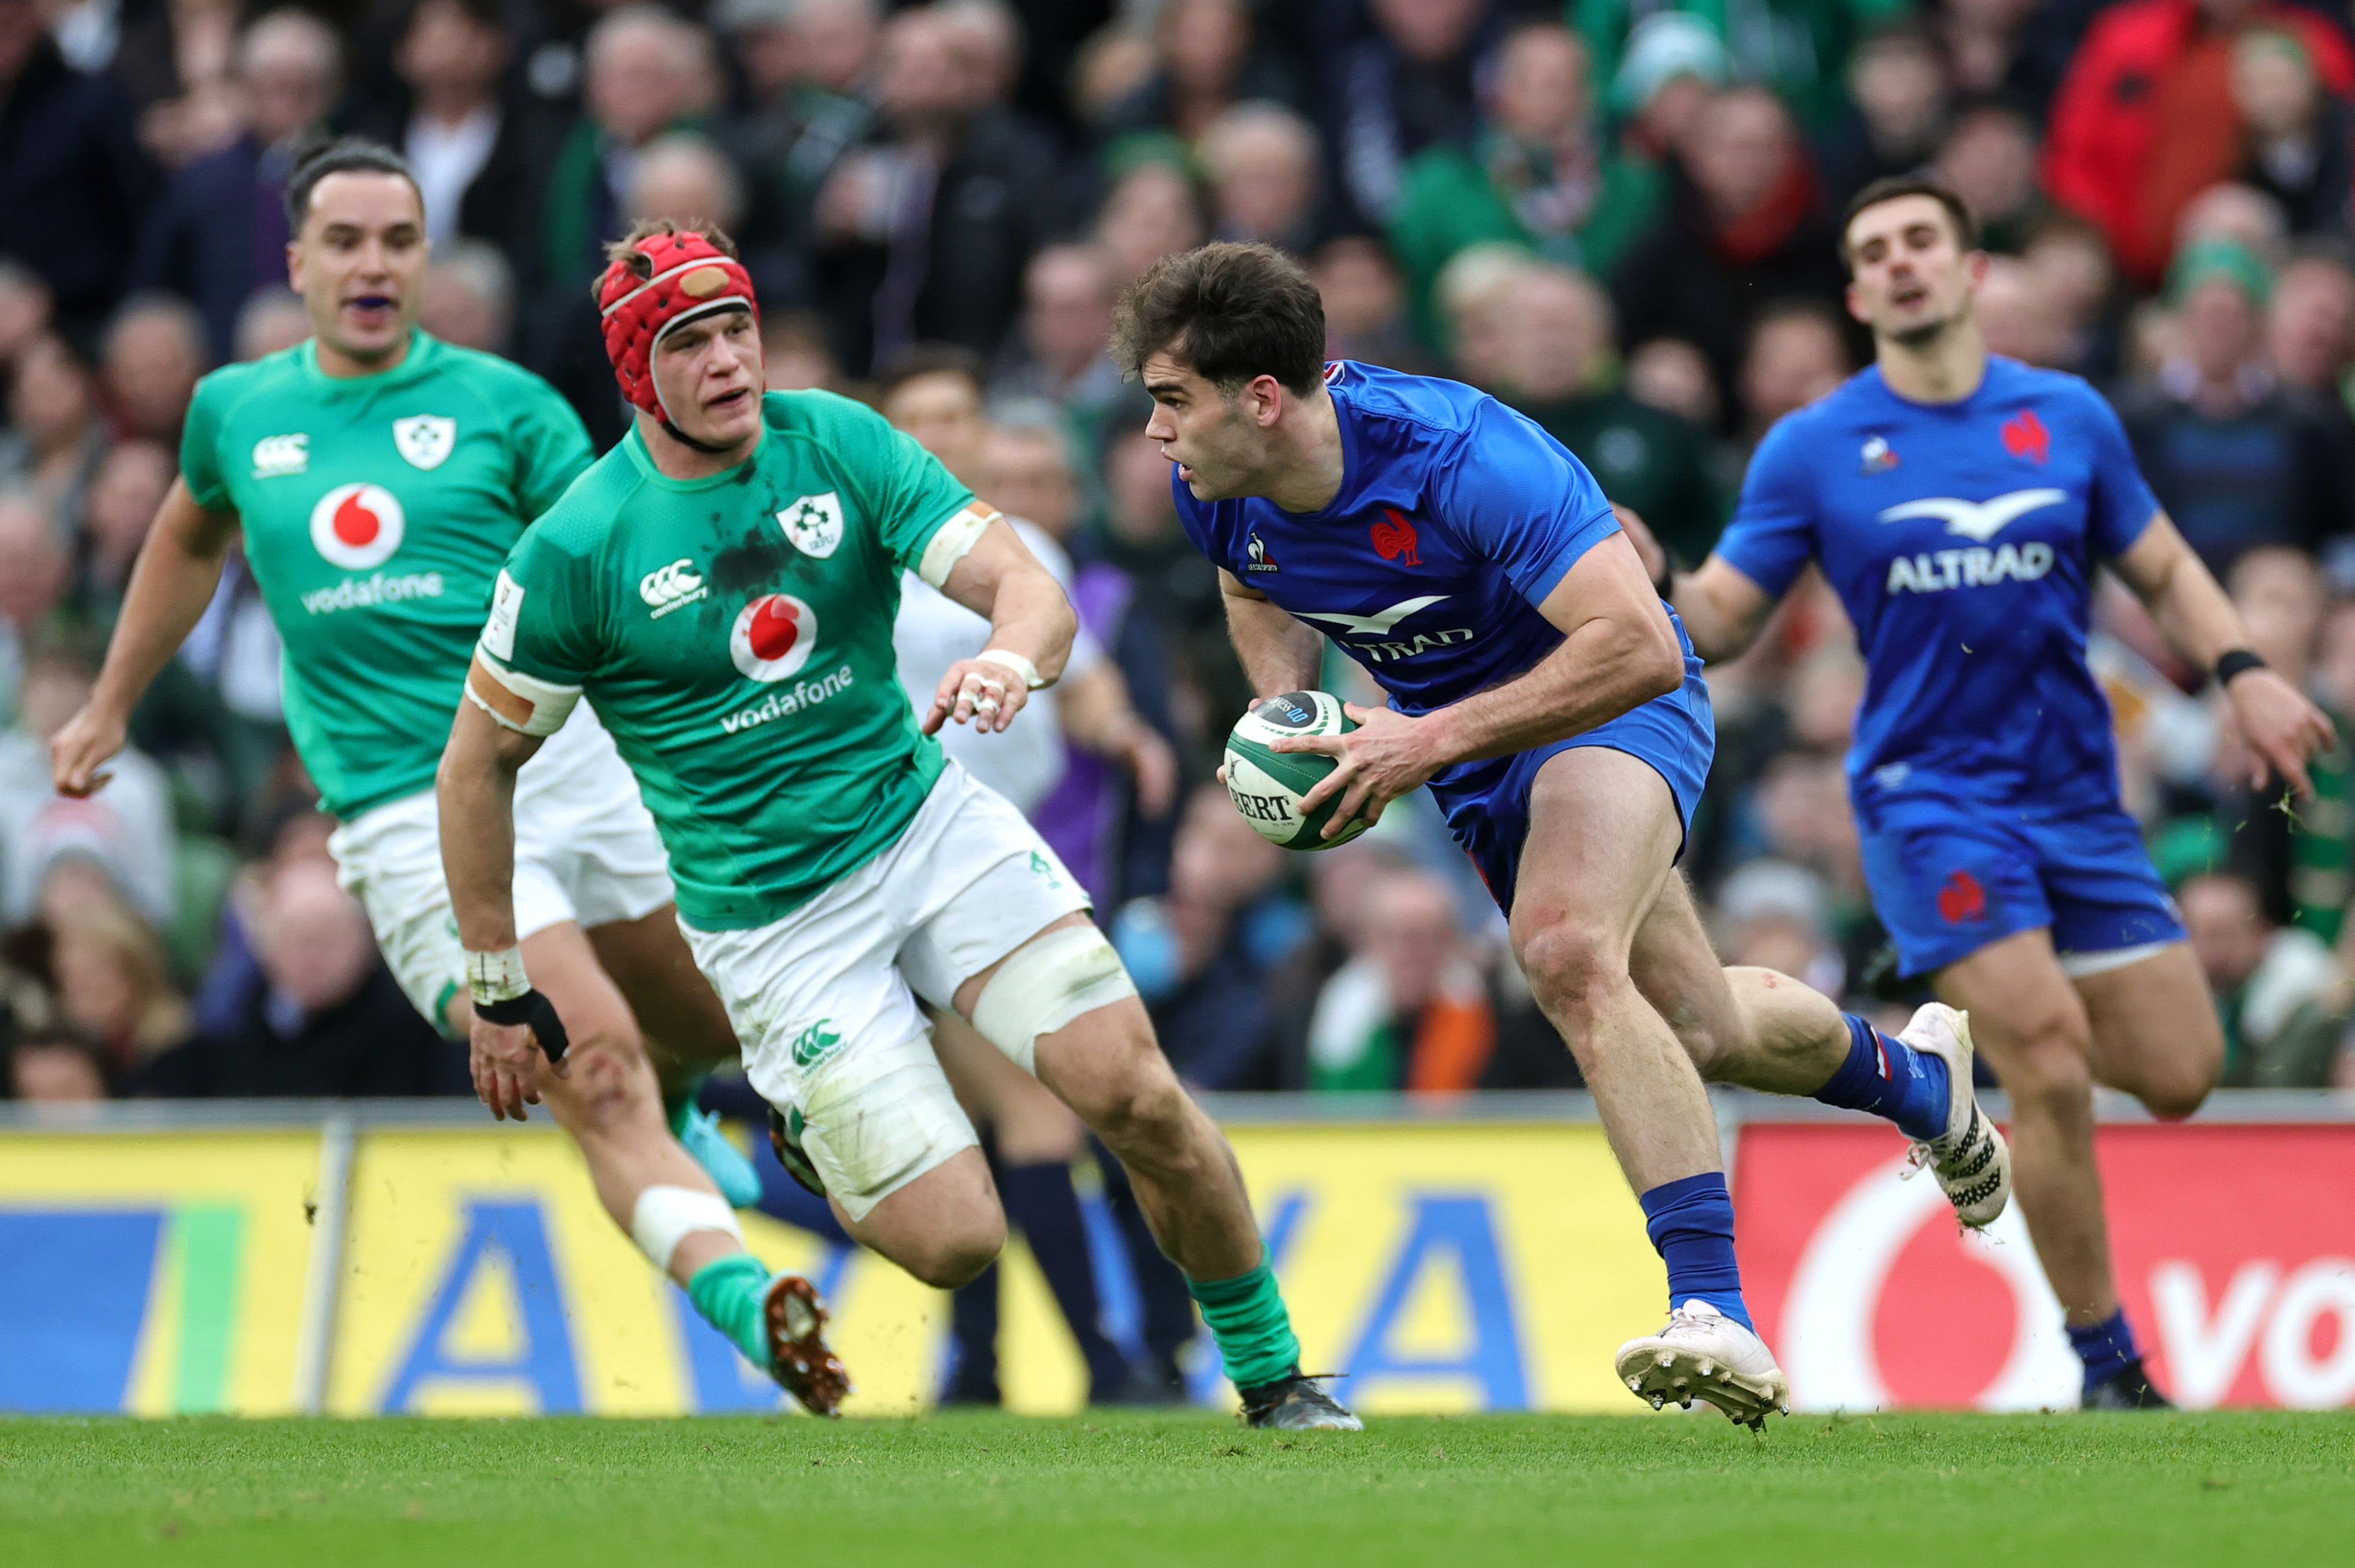 France and Ireland could produce another classic on the opening night of the Six Nations